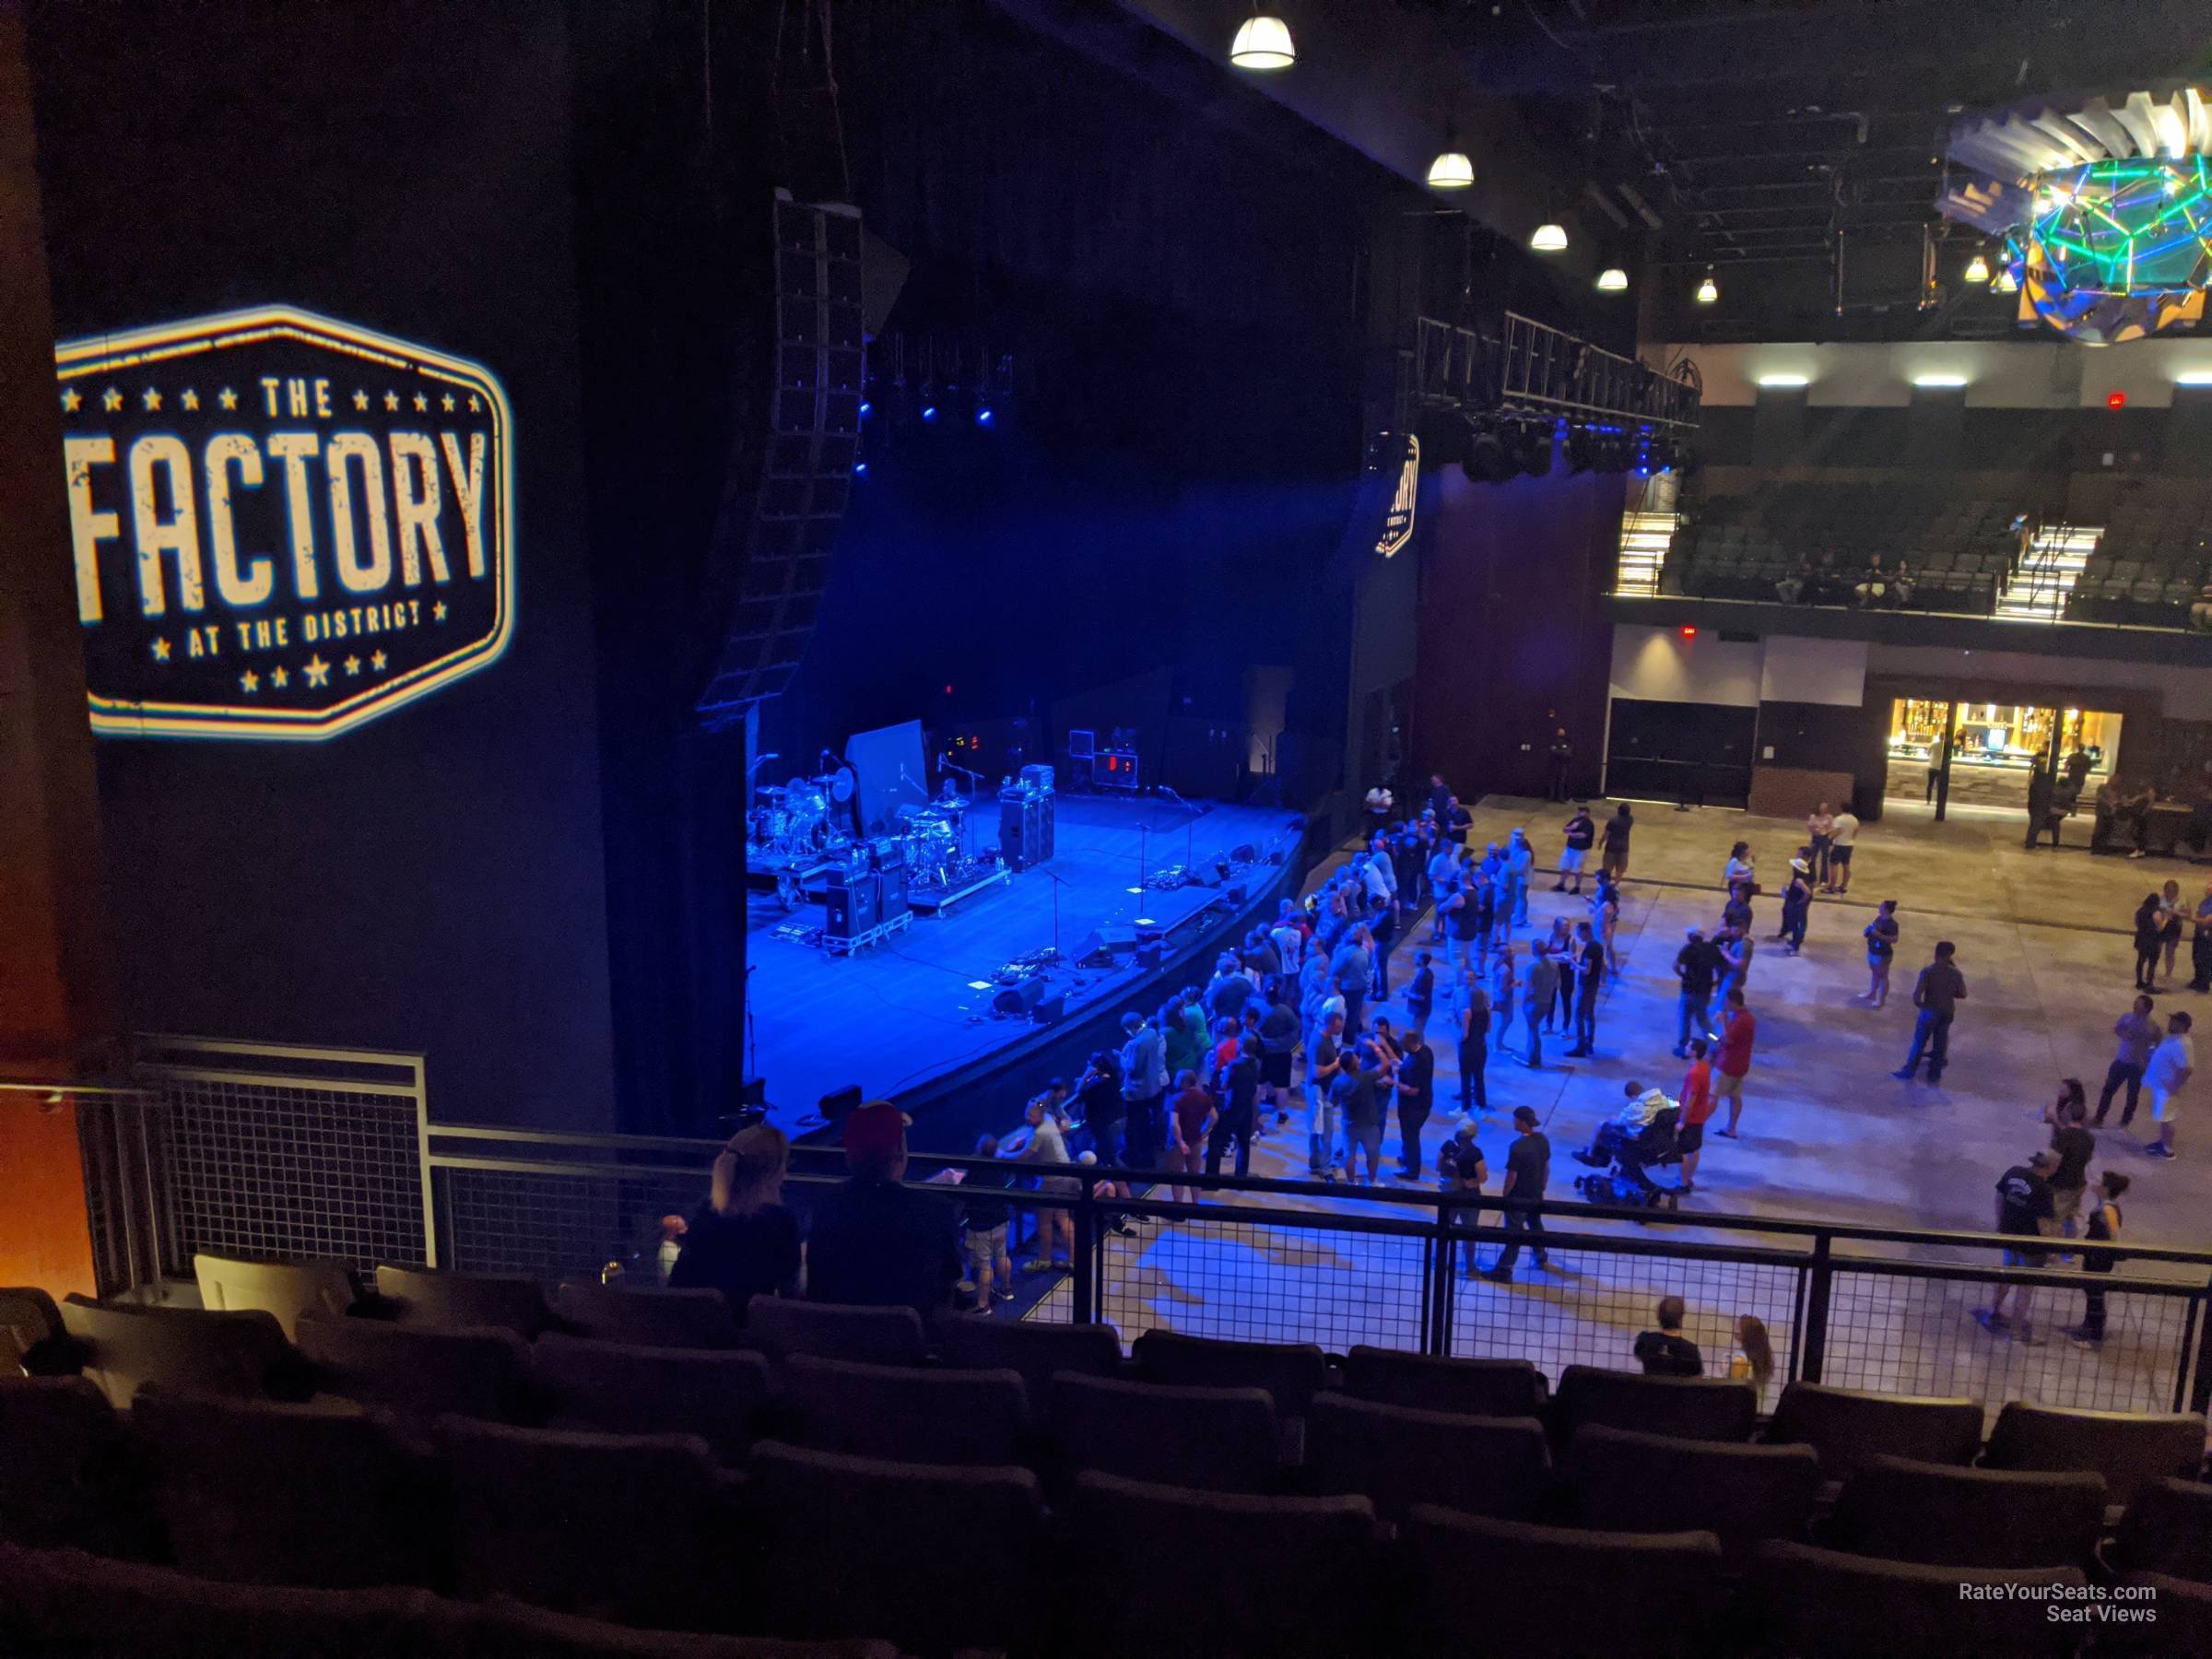 section 207, row f seat view  - the factory - stl